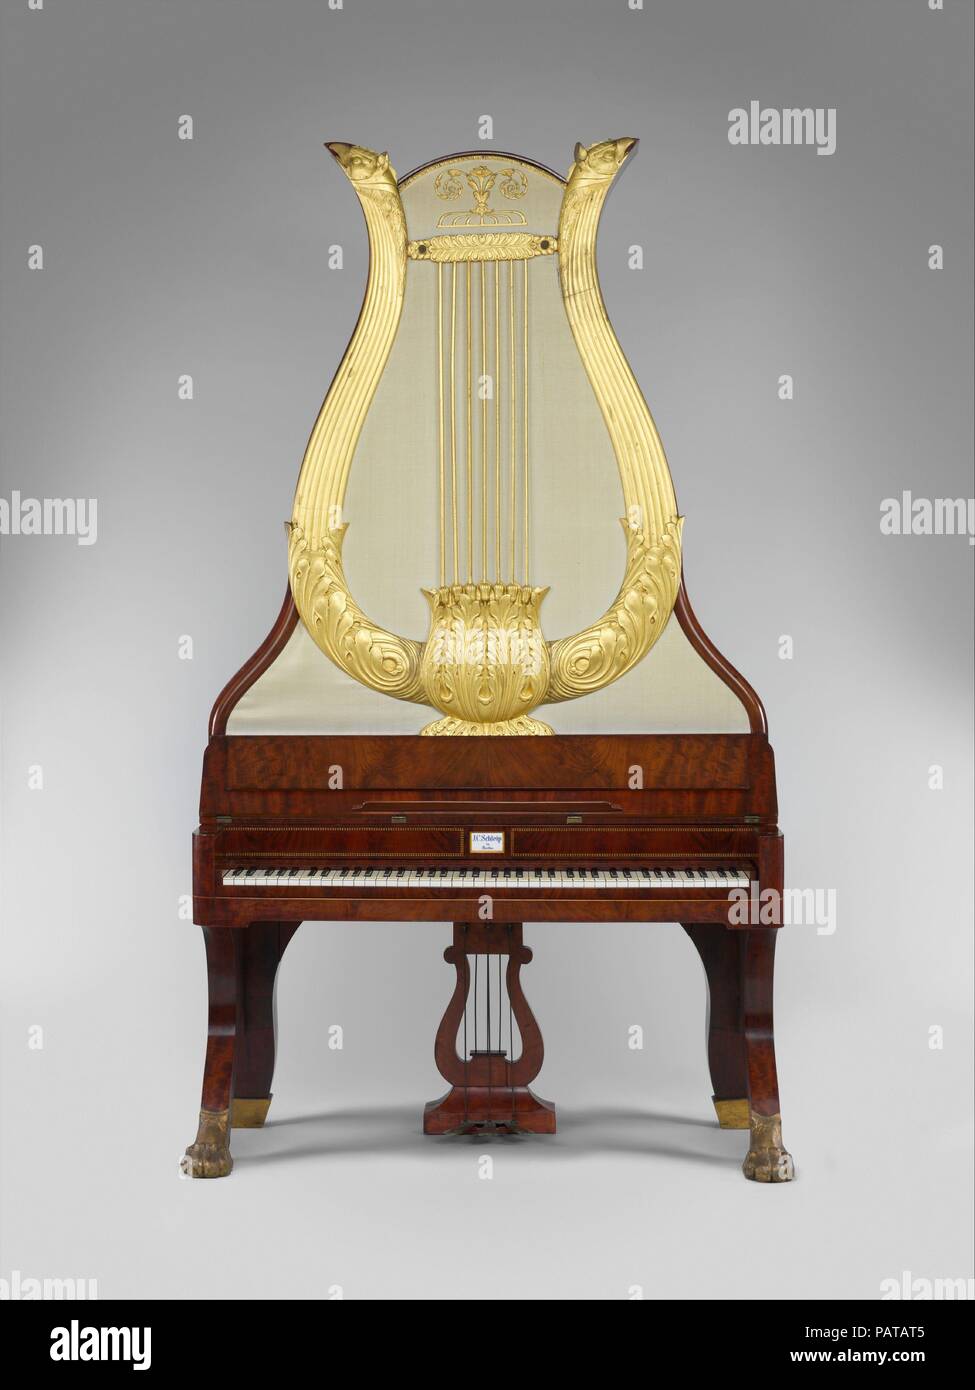 Lyraflügel. Culture: German. Dimensions: H. 7' 3';  W. 49 in., D. 2 ft.  Case L (perpendicular to keyboard):  60.3 cm (23 3/4 in.)  Case W (parallel to keyboard): 124 cm (48 13/16 in.)  Total H: 222.5 cm (87 5/8 in.)  String sound L.: longest 141 cm (55 1/2 in.), shortest 4.5 cm (1 13/16 in.), c² 29.9 cm (11 3/4 in.)  3-octave span: 48.1 cm (18 15/16 in.). Maker: Johann Christian Schleip (1786-1848). Date: ca. 1820-44.  This type of upright piano was made almost exclusively in Berlin between 1820 and 1850. The Lyraflügel was a fashionable fixture of middle-class Biedermeier parlors in northern Stock Photo